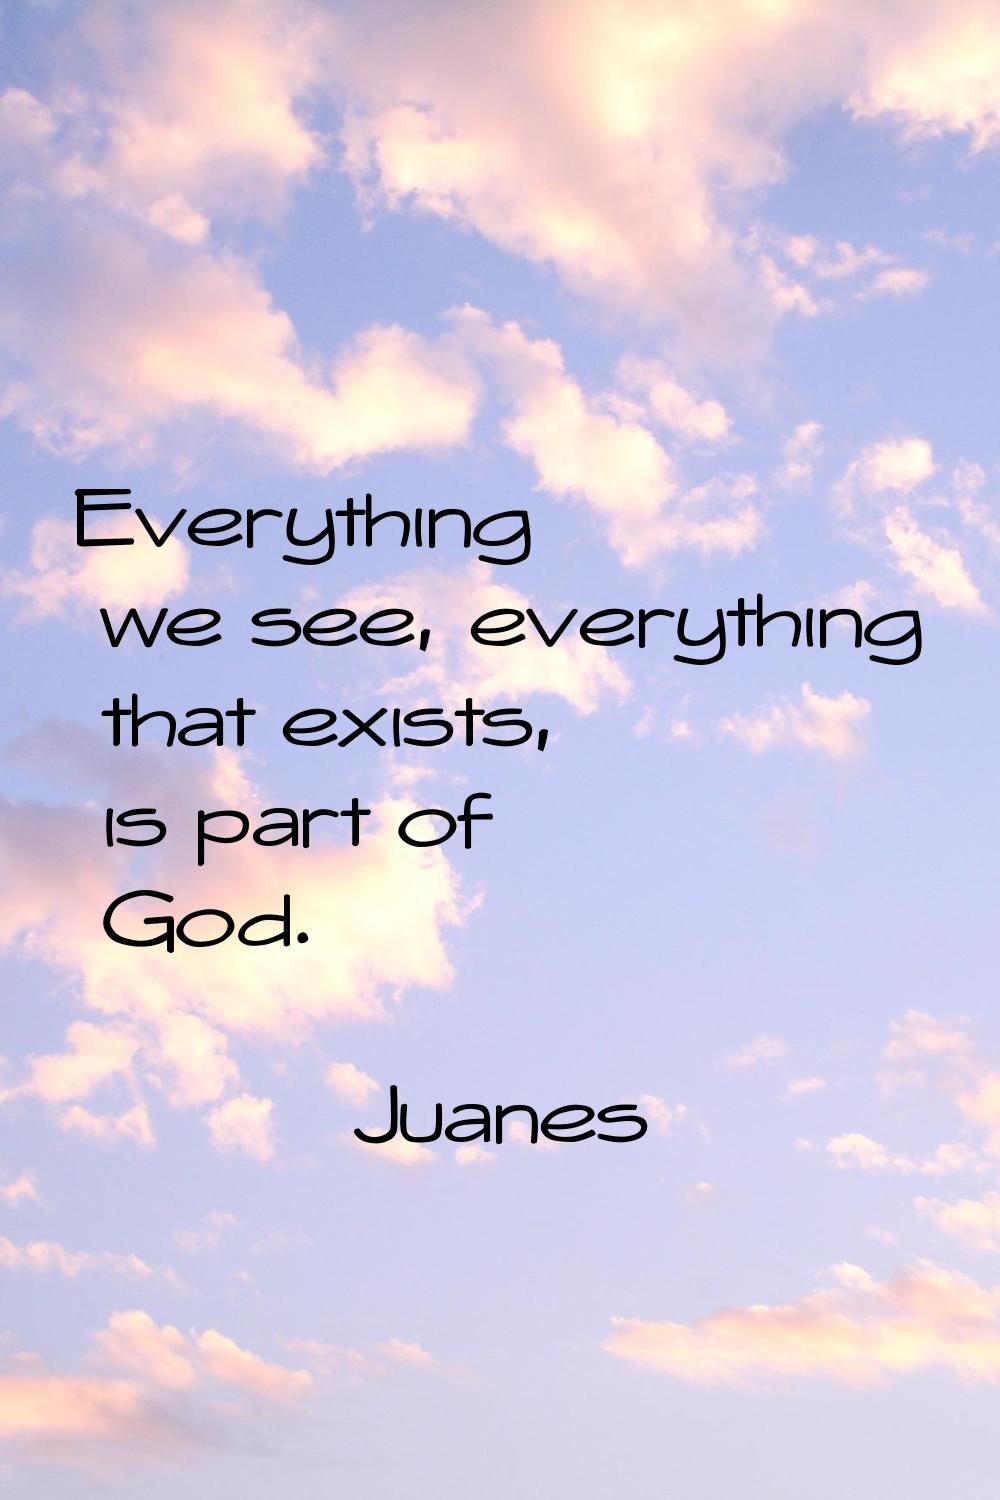 Everything we see, everything that exists, is part of God.